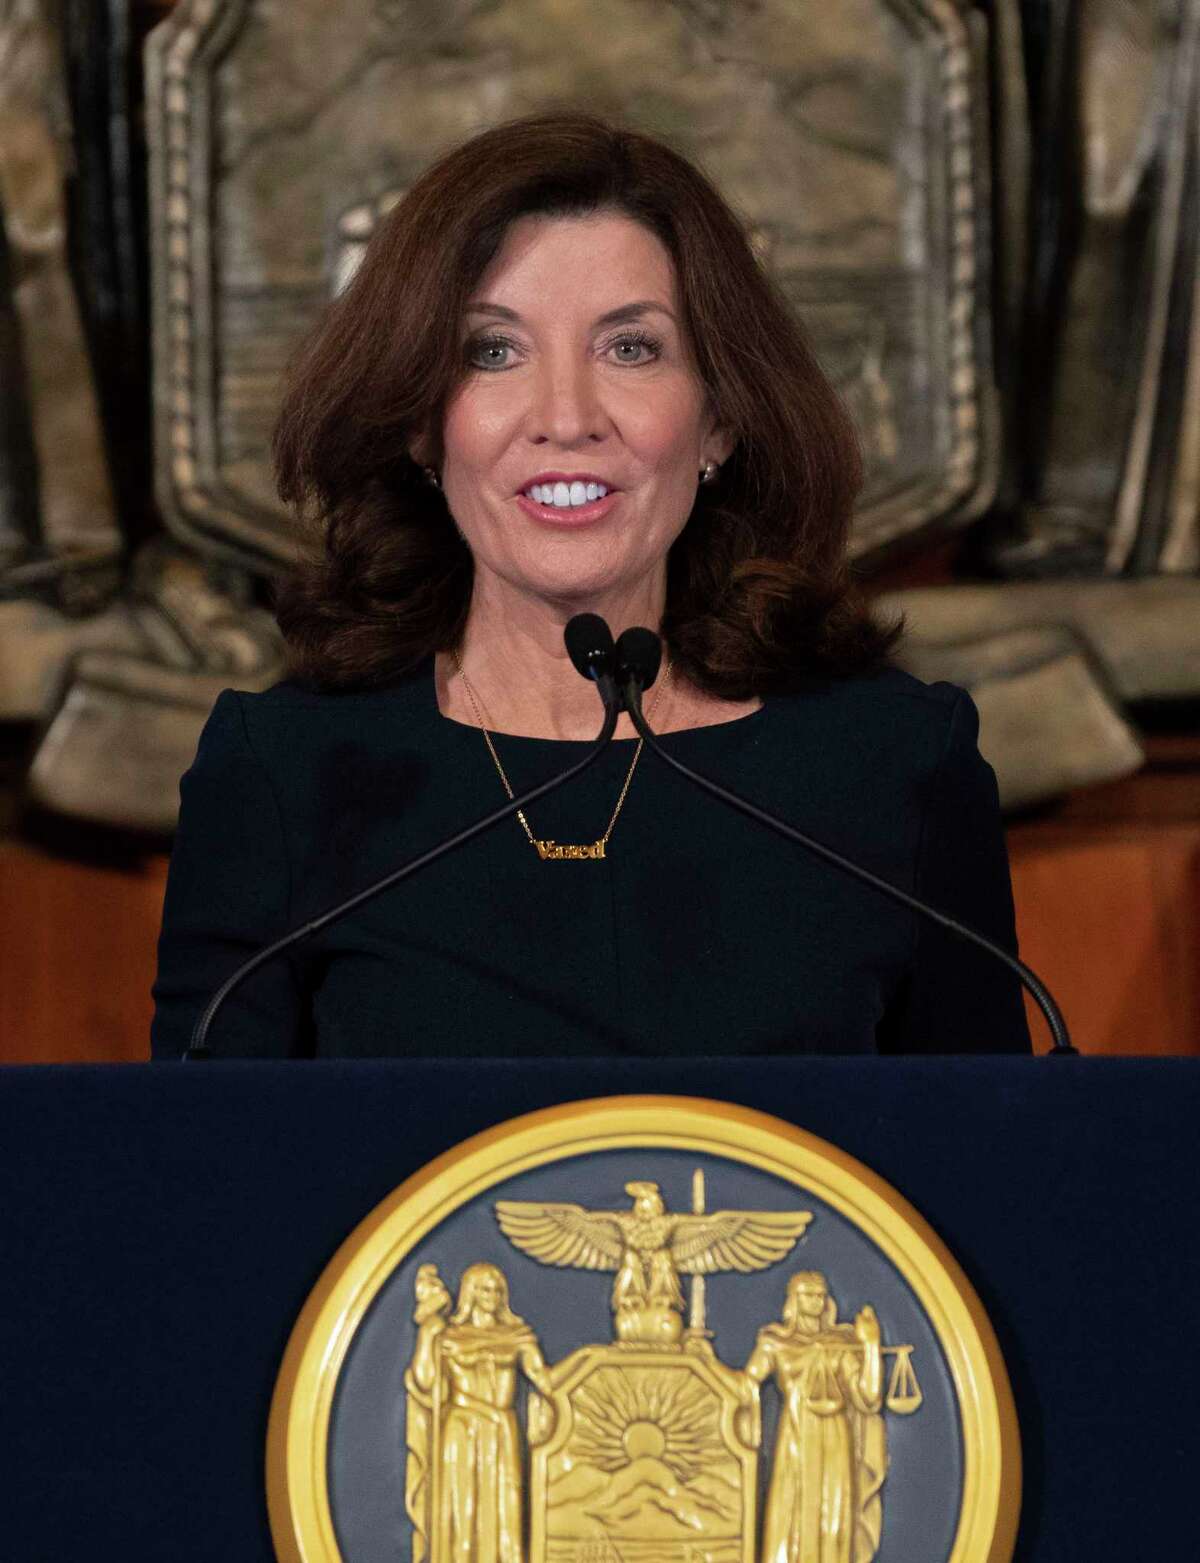 Gov. Kathy Hochul on Monday declared a state of emergency for portions of New York, including Schenectady and Schoharie counties, as a powerful rain storm moved into the Northeast.